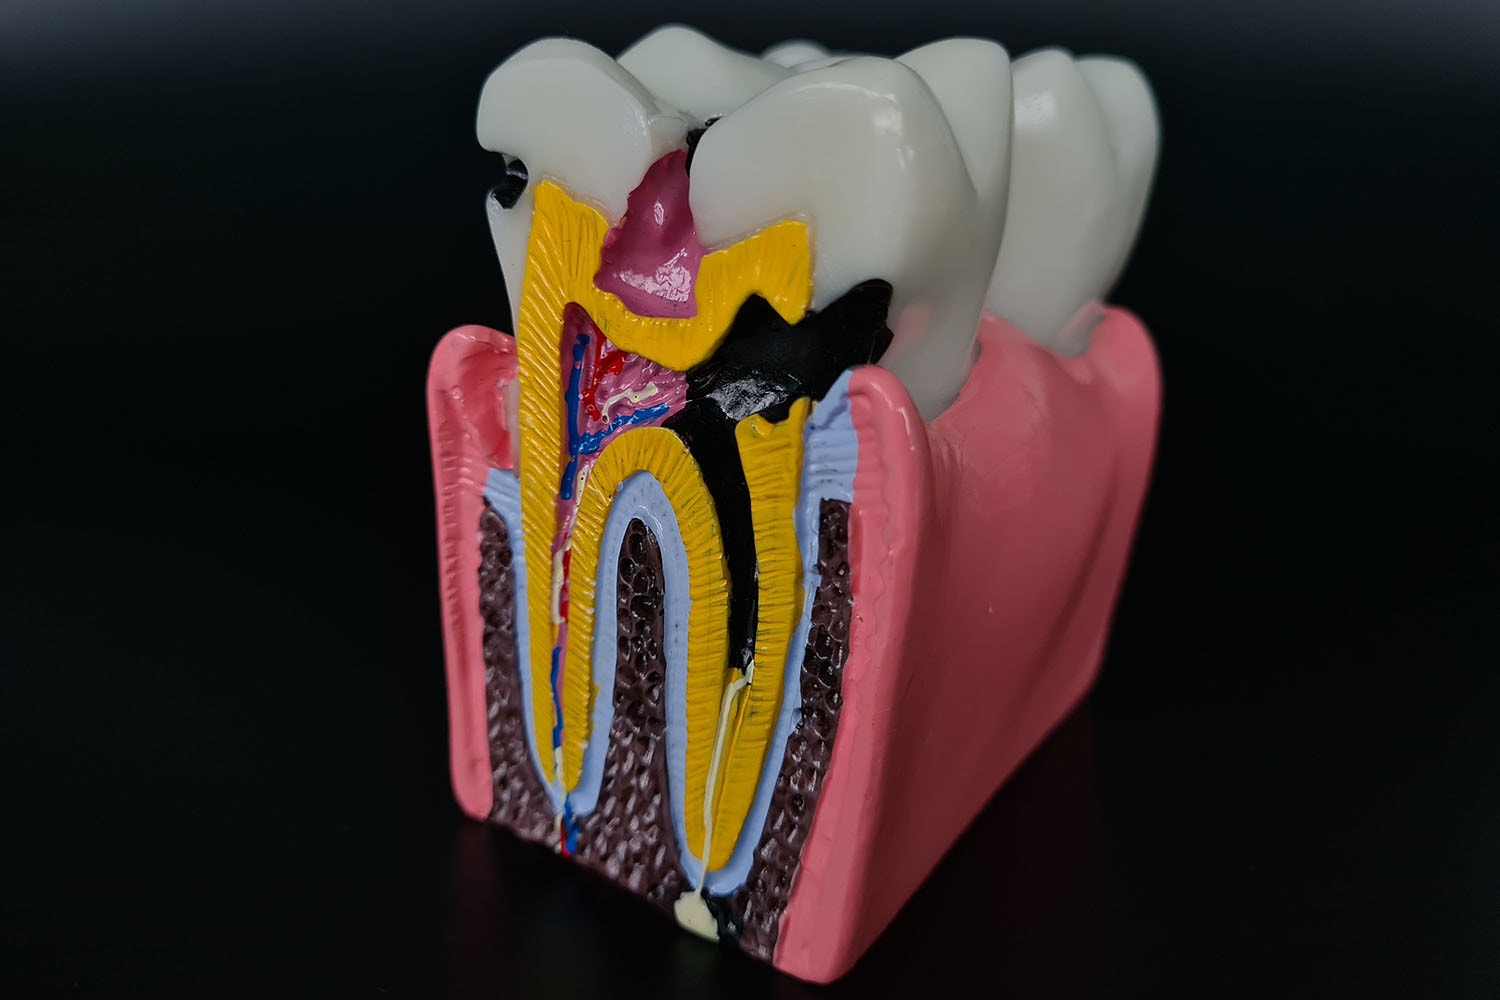 Process of root canal infection and tooth with caries.